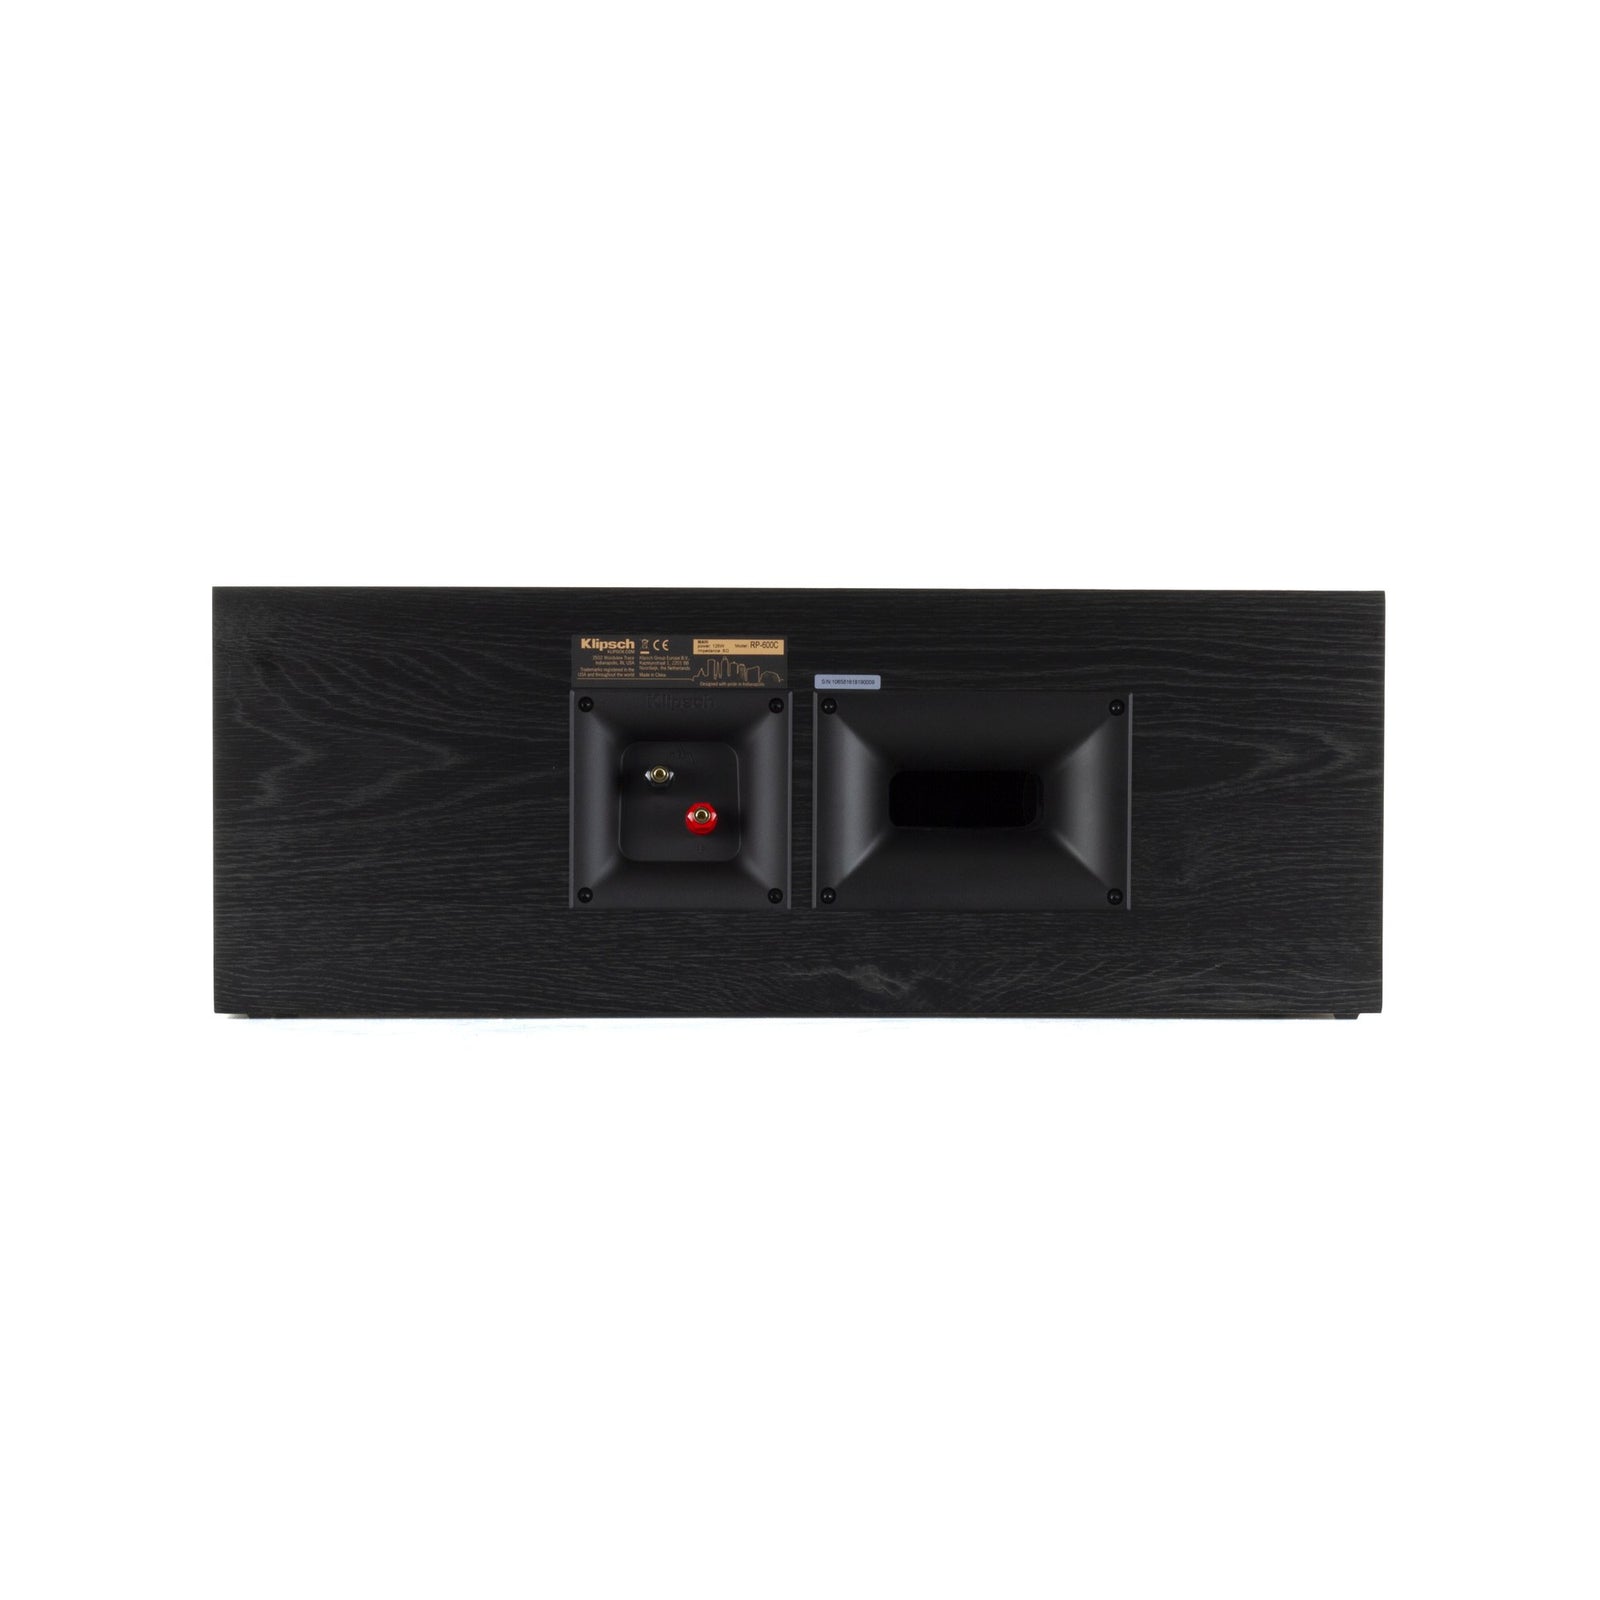 Klipsch Reference Premier Dual 6.5" Center back. Klipsch Speakers, Headphones, Wireless Speakers, In-Ceiling Speakers, Outdoor Speakers, Home Cinema, Amplifiers, Sound Bars, Subwoofers, Powered Speakers, Computer Speakers, home audio, Bookshelf Speakers, Floorstanding, Home Theatre… Available at VinylSound.ca | Klipsch Canada